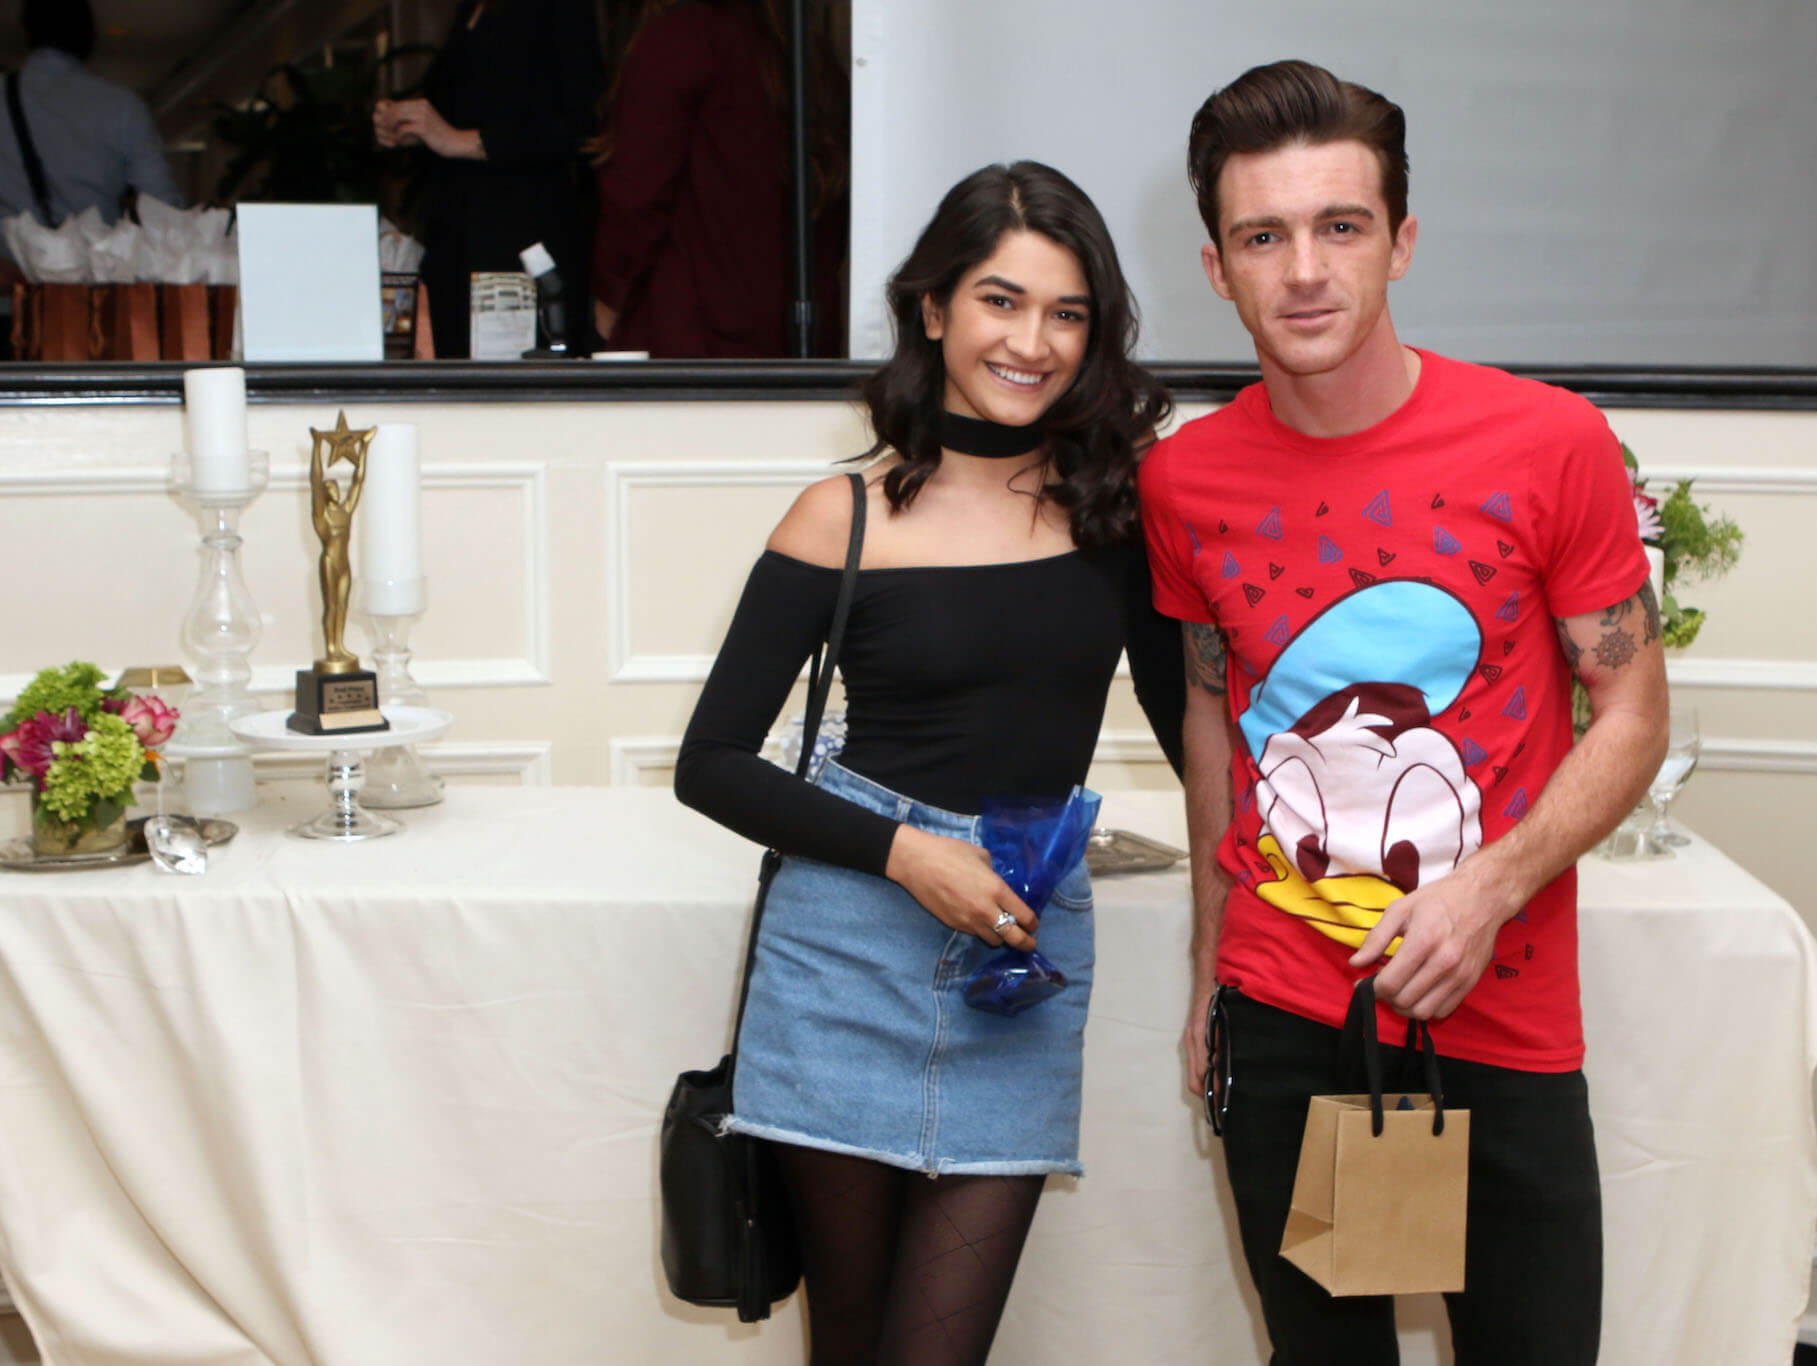 Drake Bell and wife Janet Von Schmeling standing next to each other and smiling. Drake Bell and his wife have one kid together.